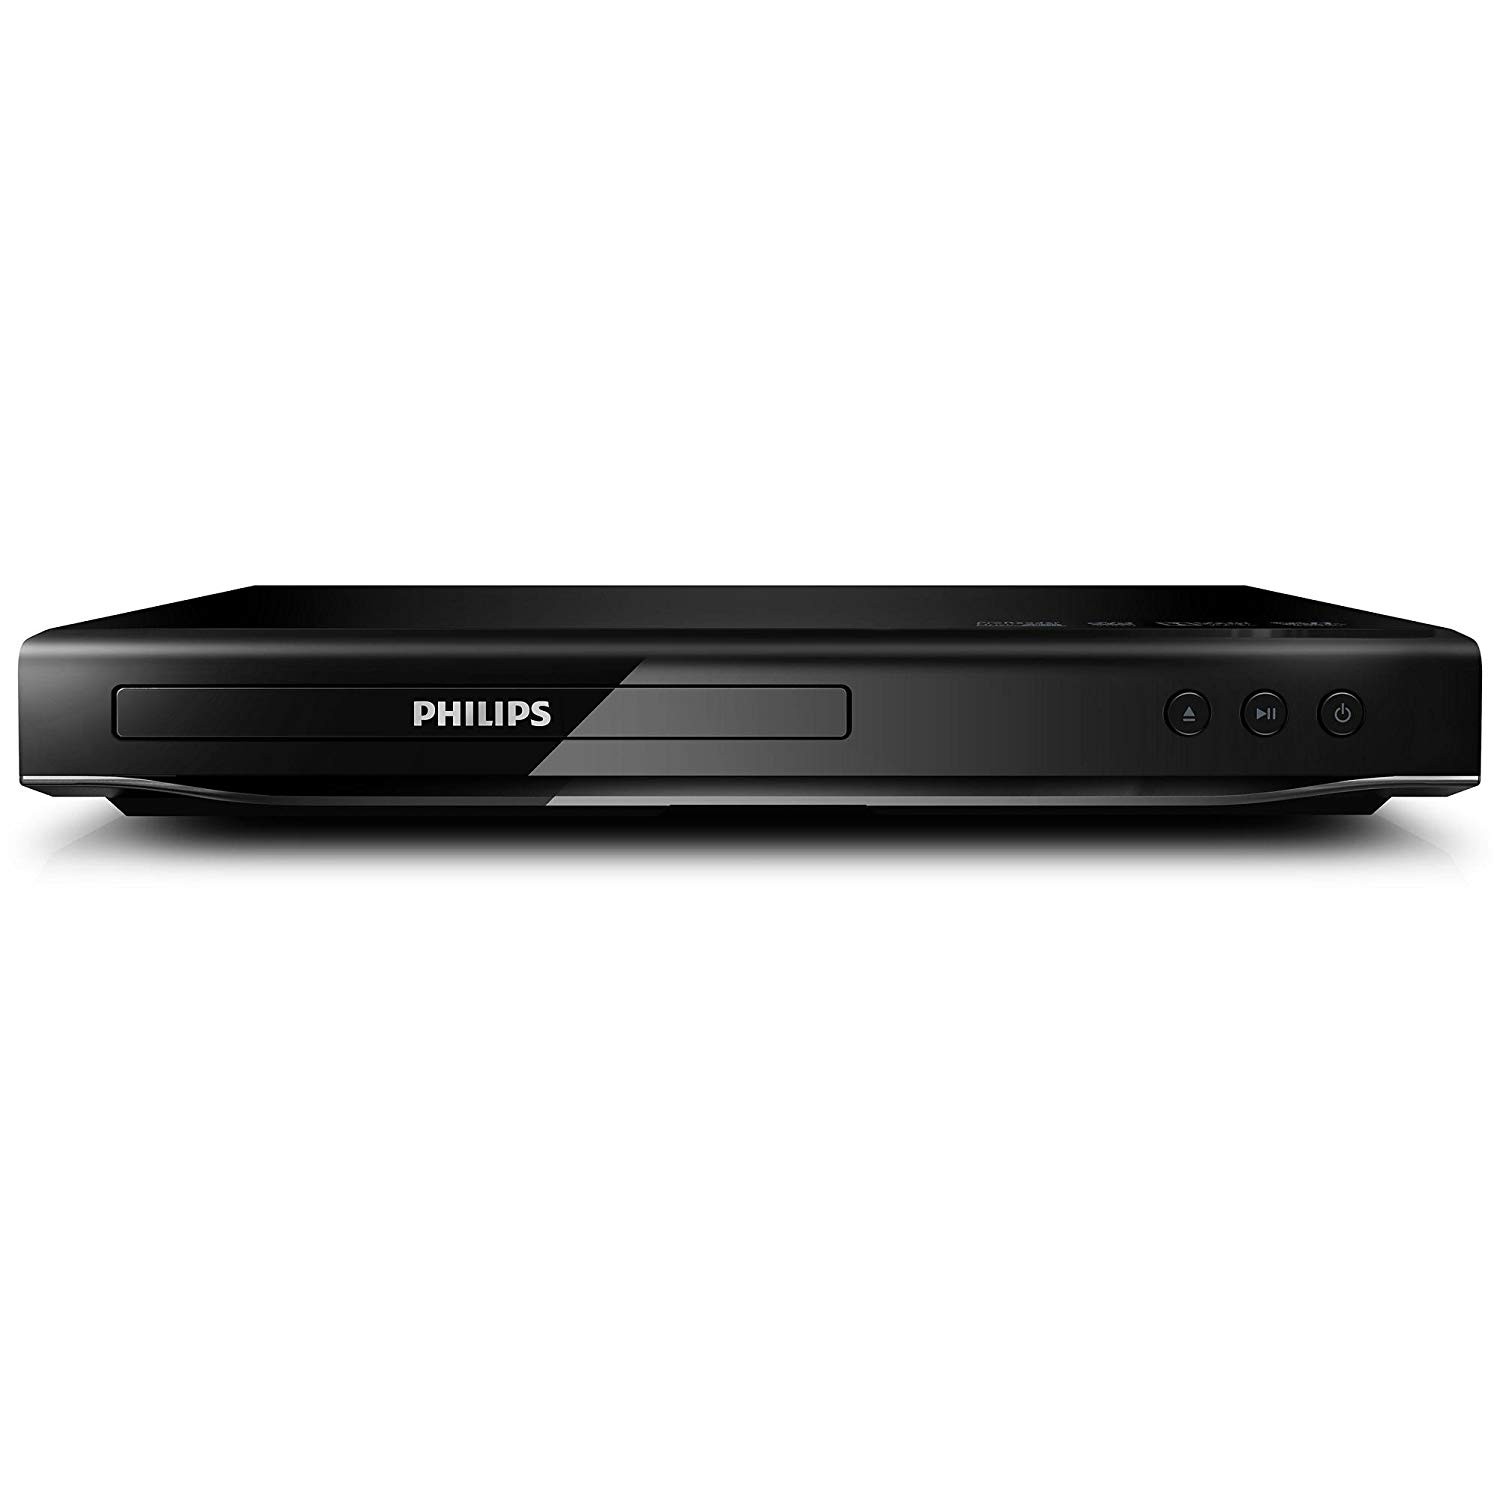 Philips DVP2880 DVD Player - Yes (up to 1080p) - NTSC/PAL